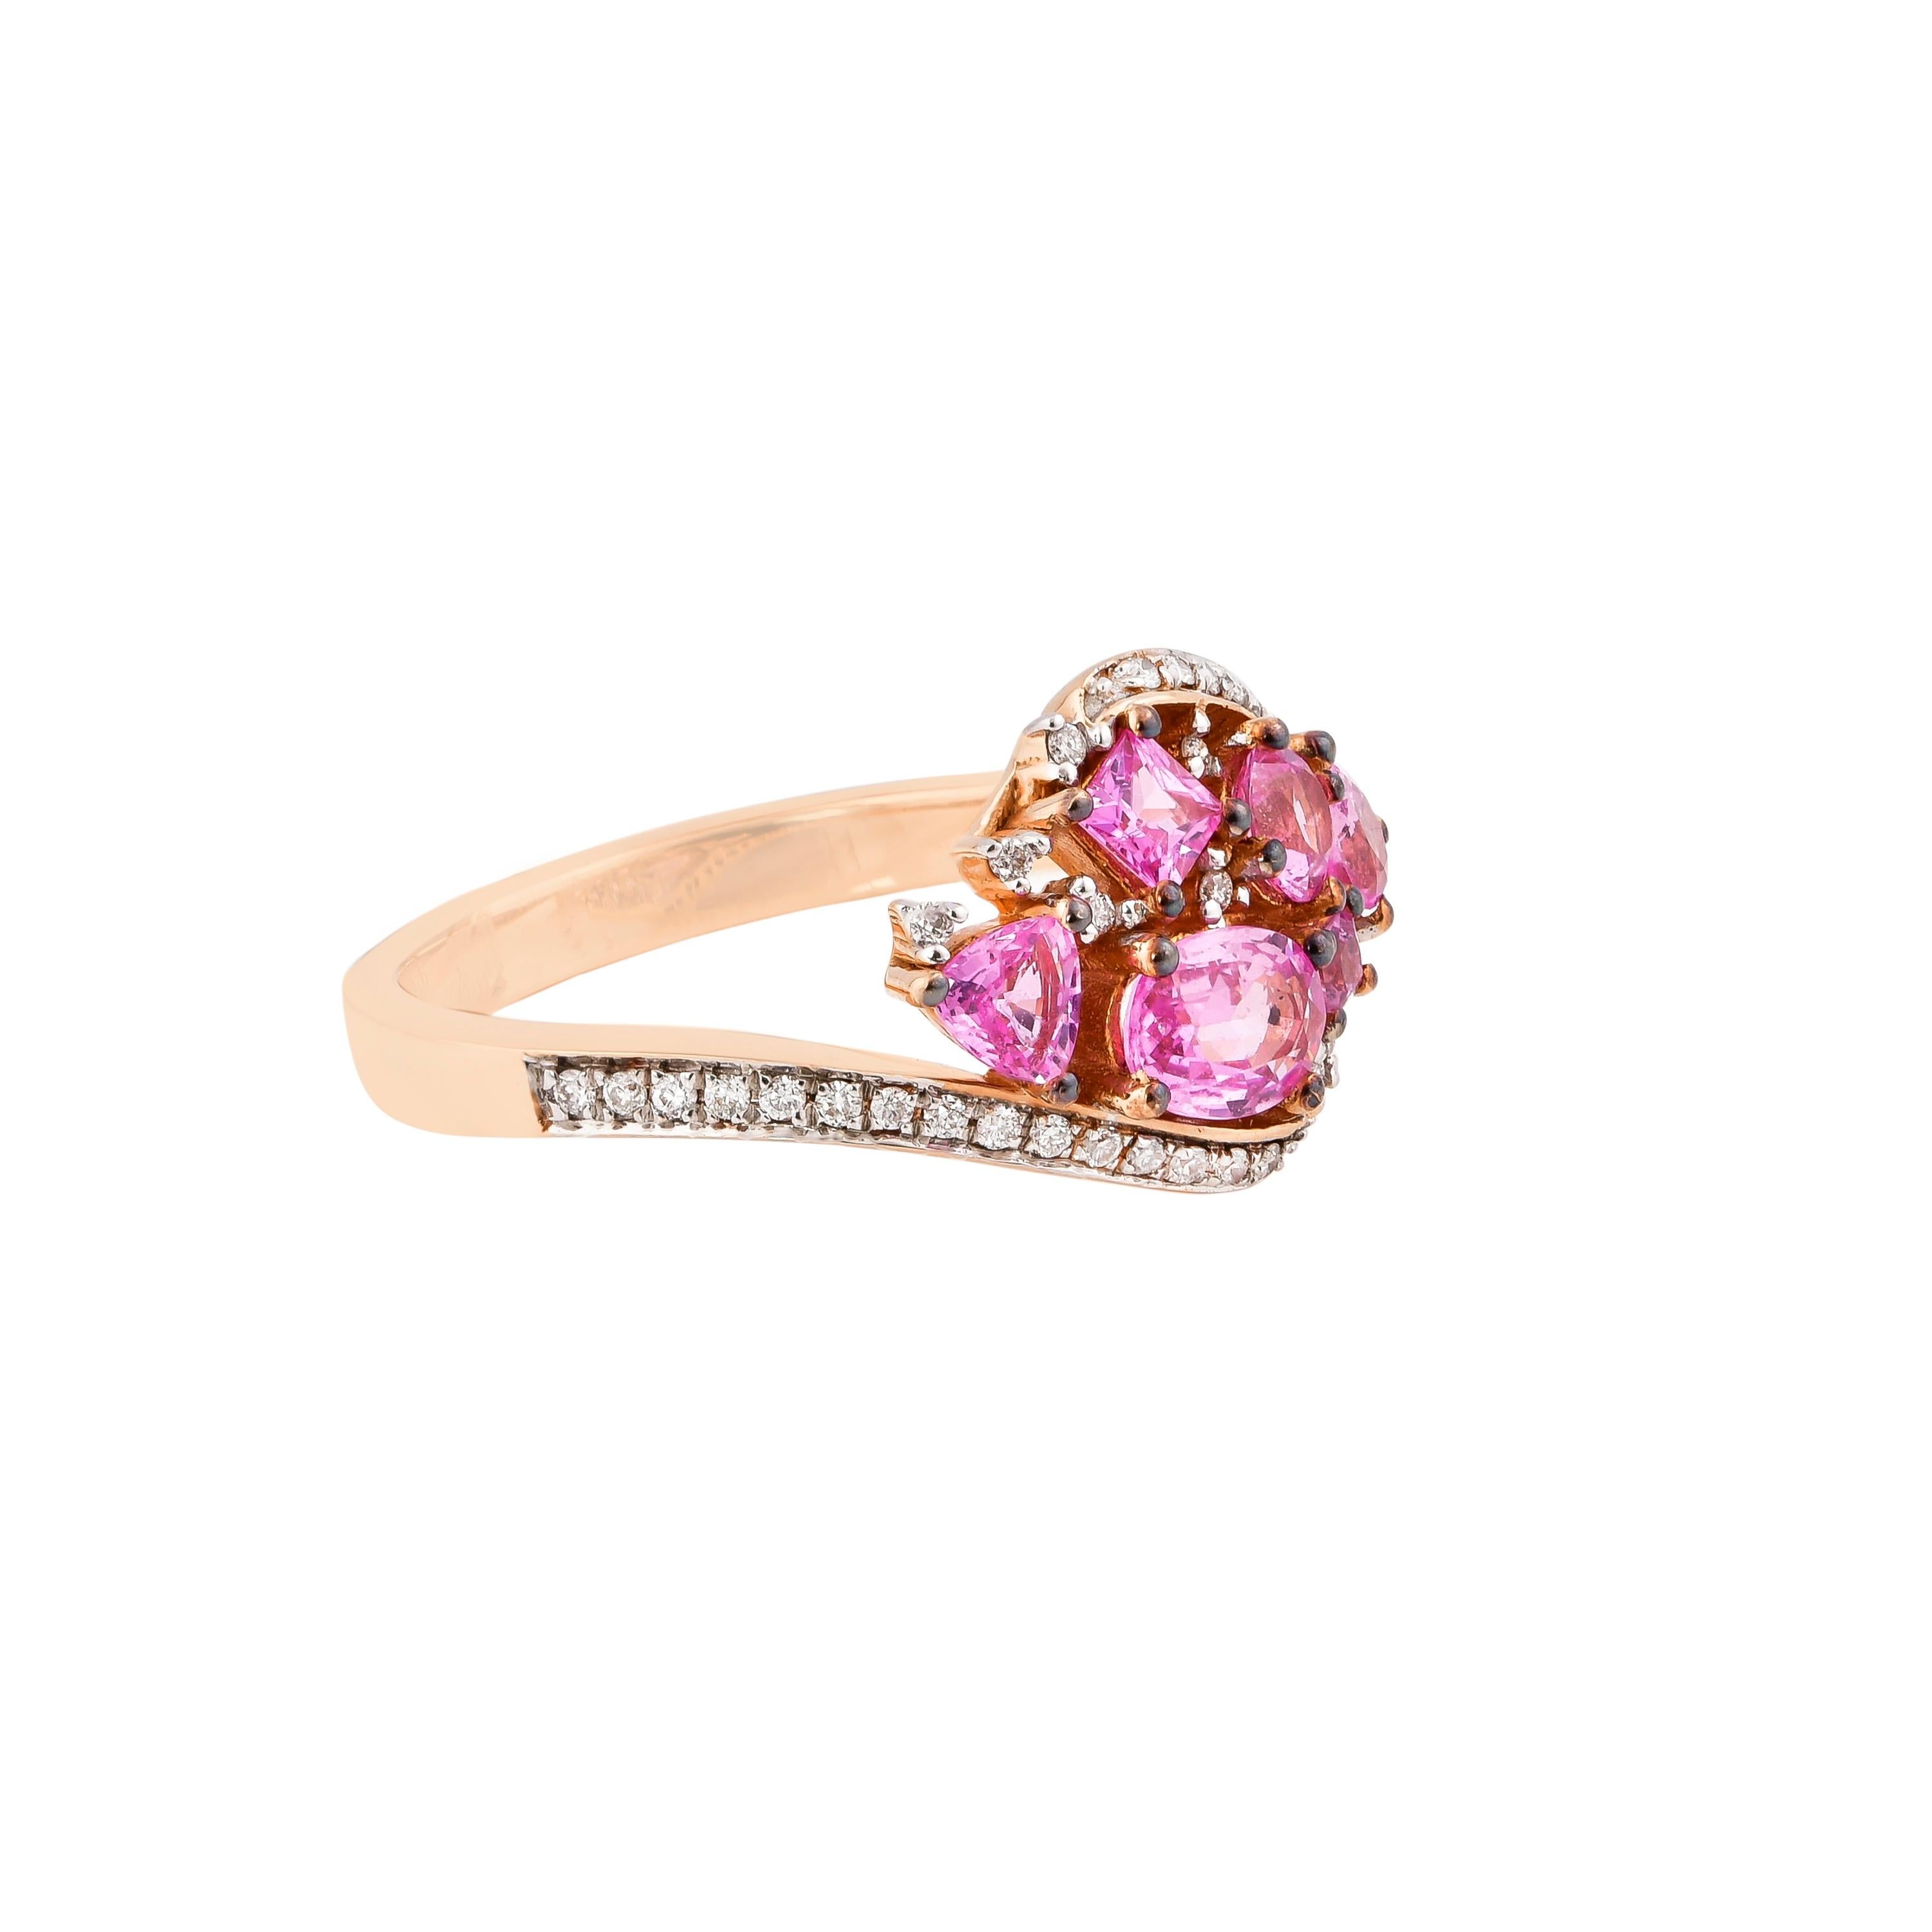 Contemporary 1.4 Carat Pink Sapphire Ring in 18 Karat Rose Gold with Diamond For Sale